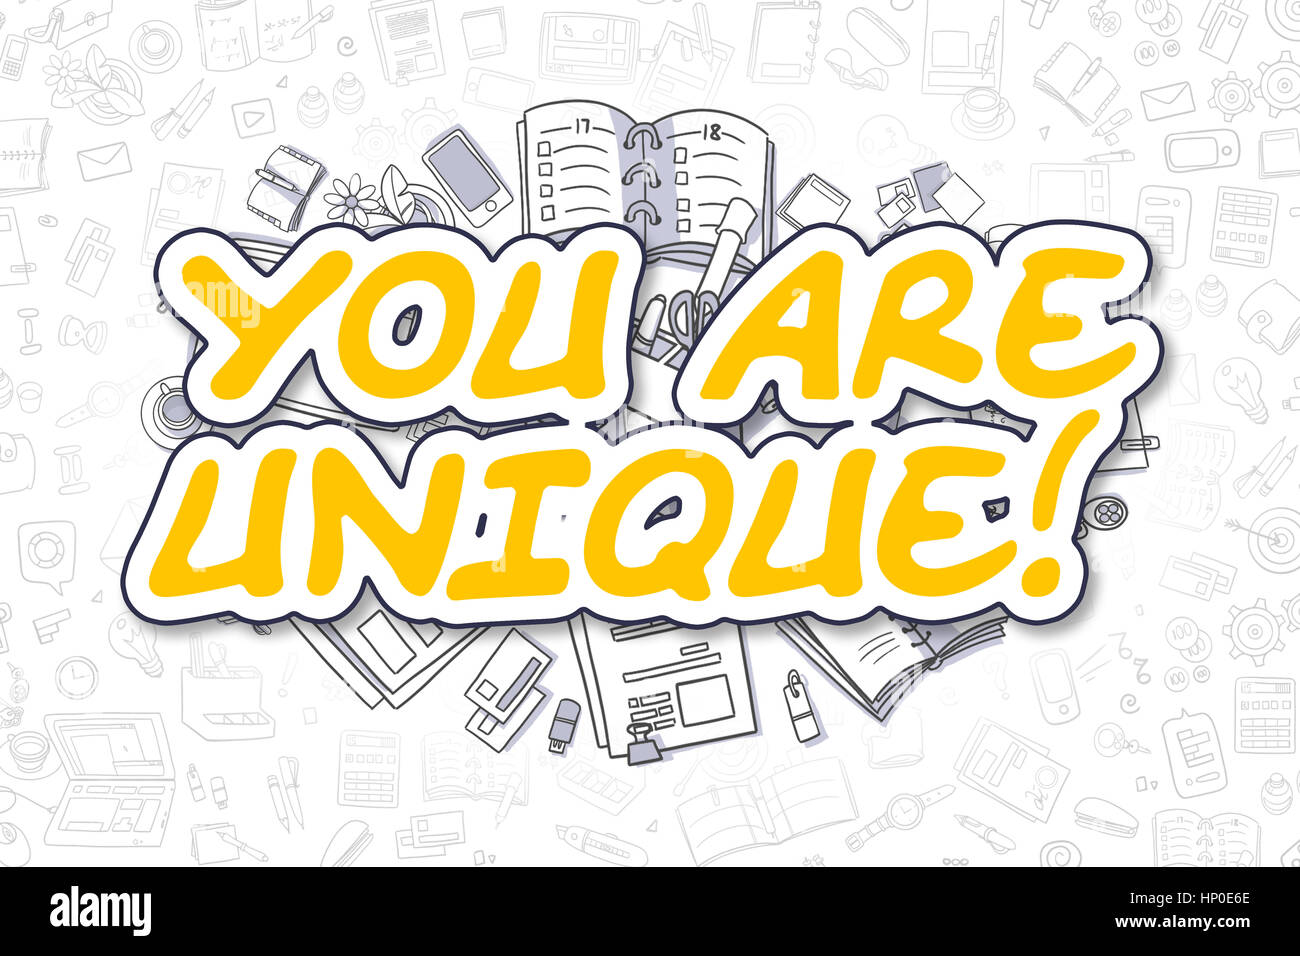 You Are Unique - Doodle Yellow Text. Business Concept. Stock Photo